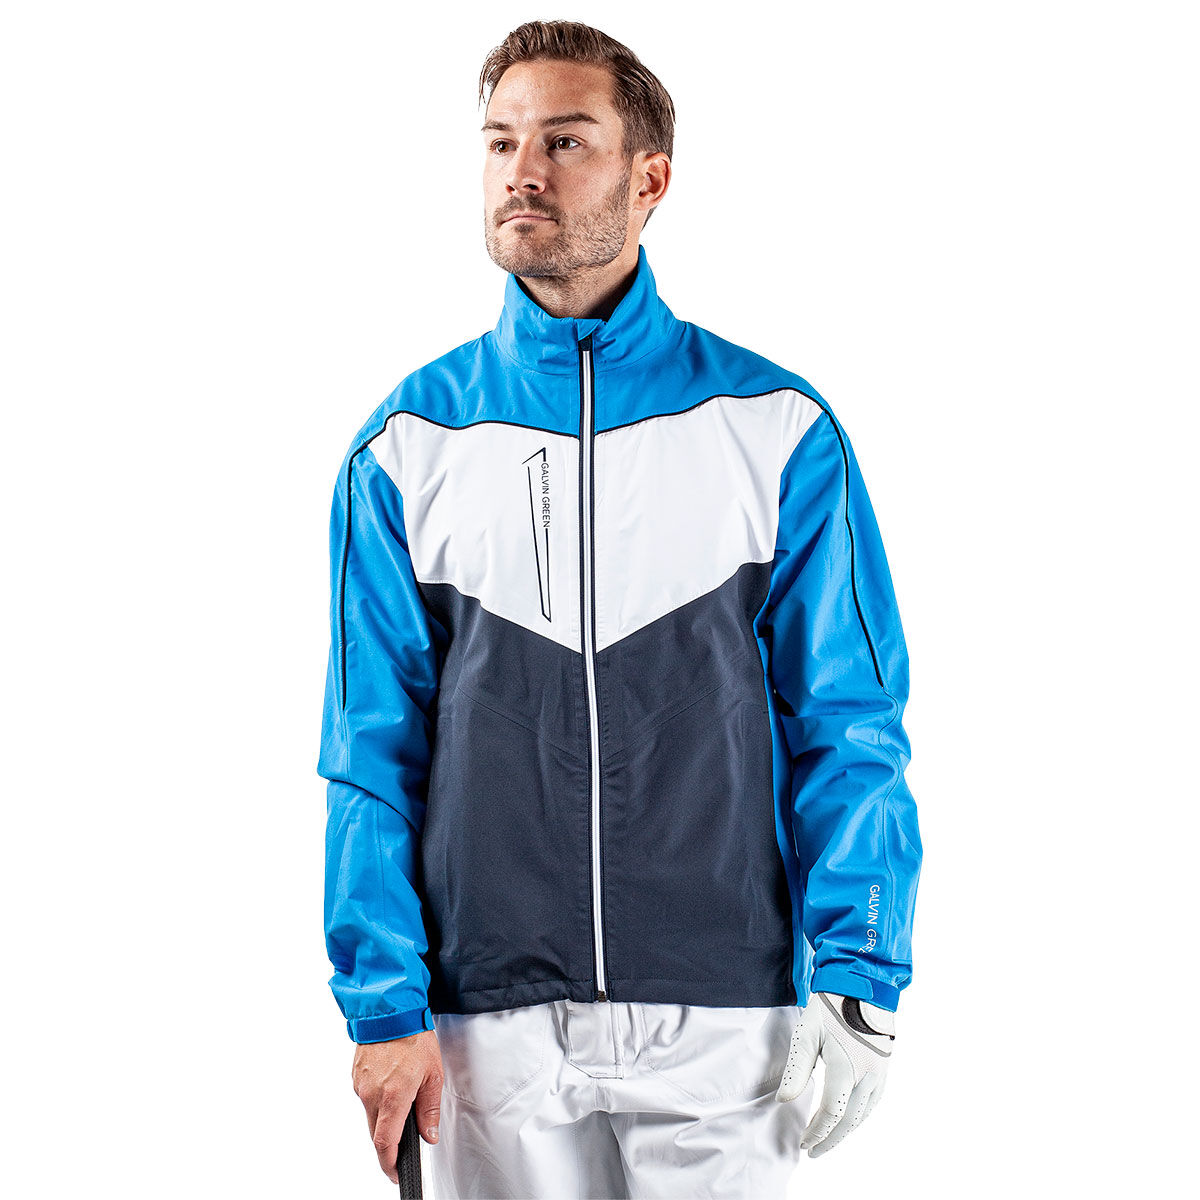 Galvin Green Men’s Navy Blue and White Waterproof Armstrong Golf Jacket, Size: Medium | American Golf